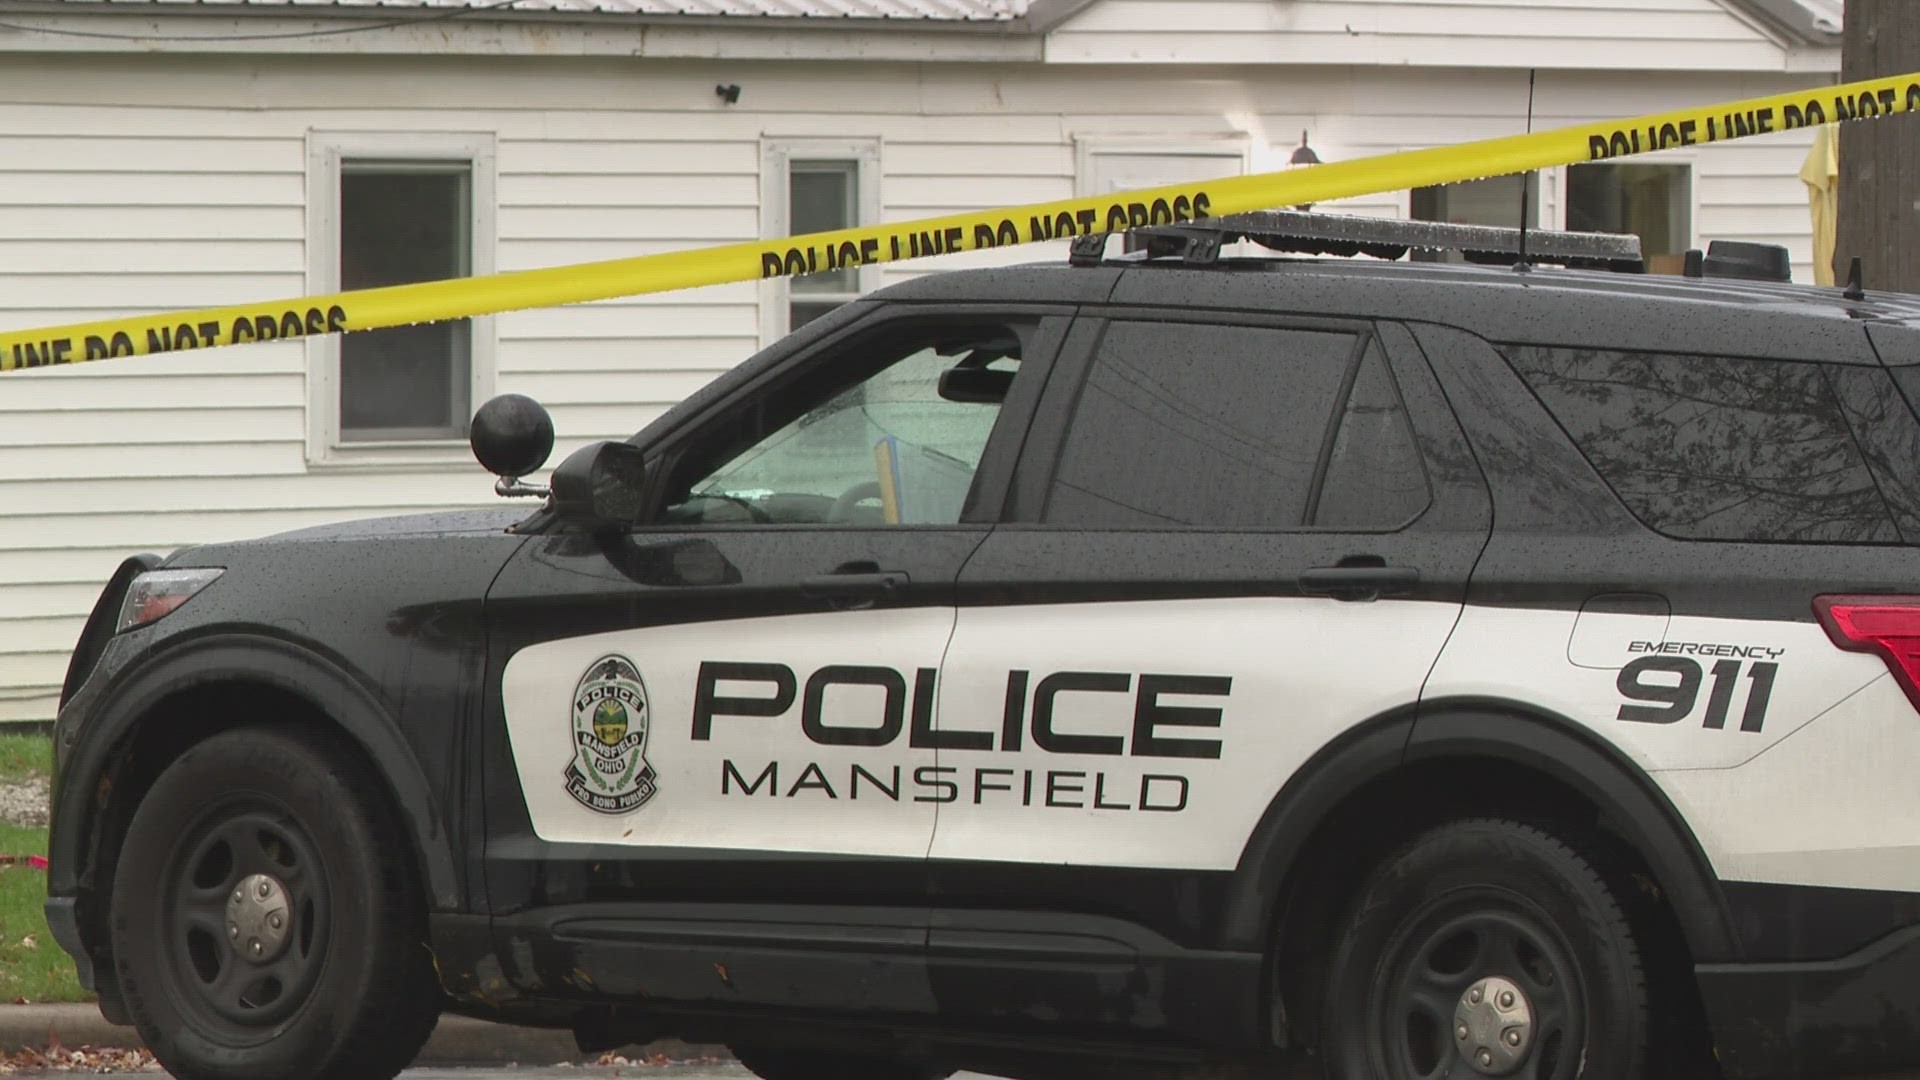 Up to 50 people attended the party on Friday in Mansfield. Police are still trying to identify suspects.